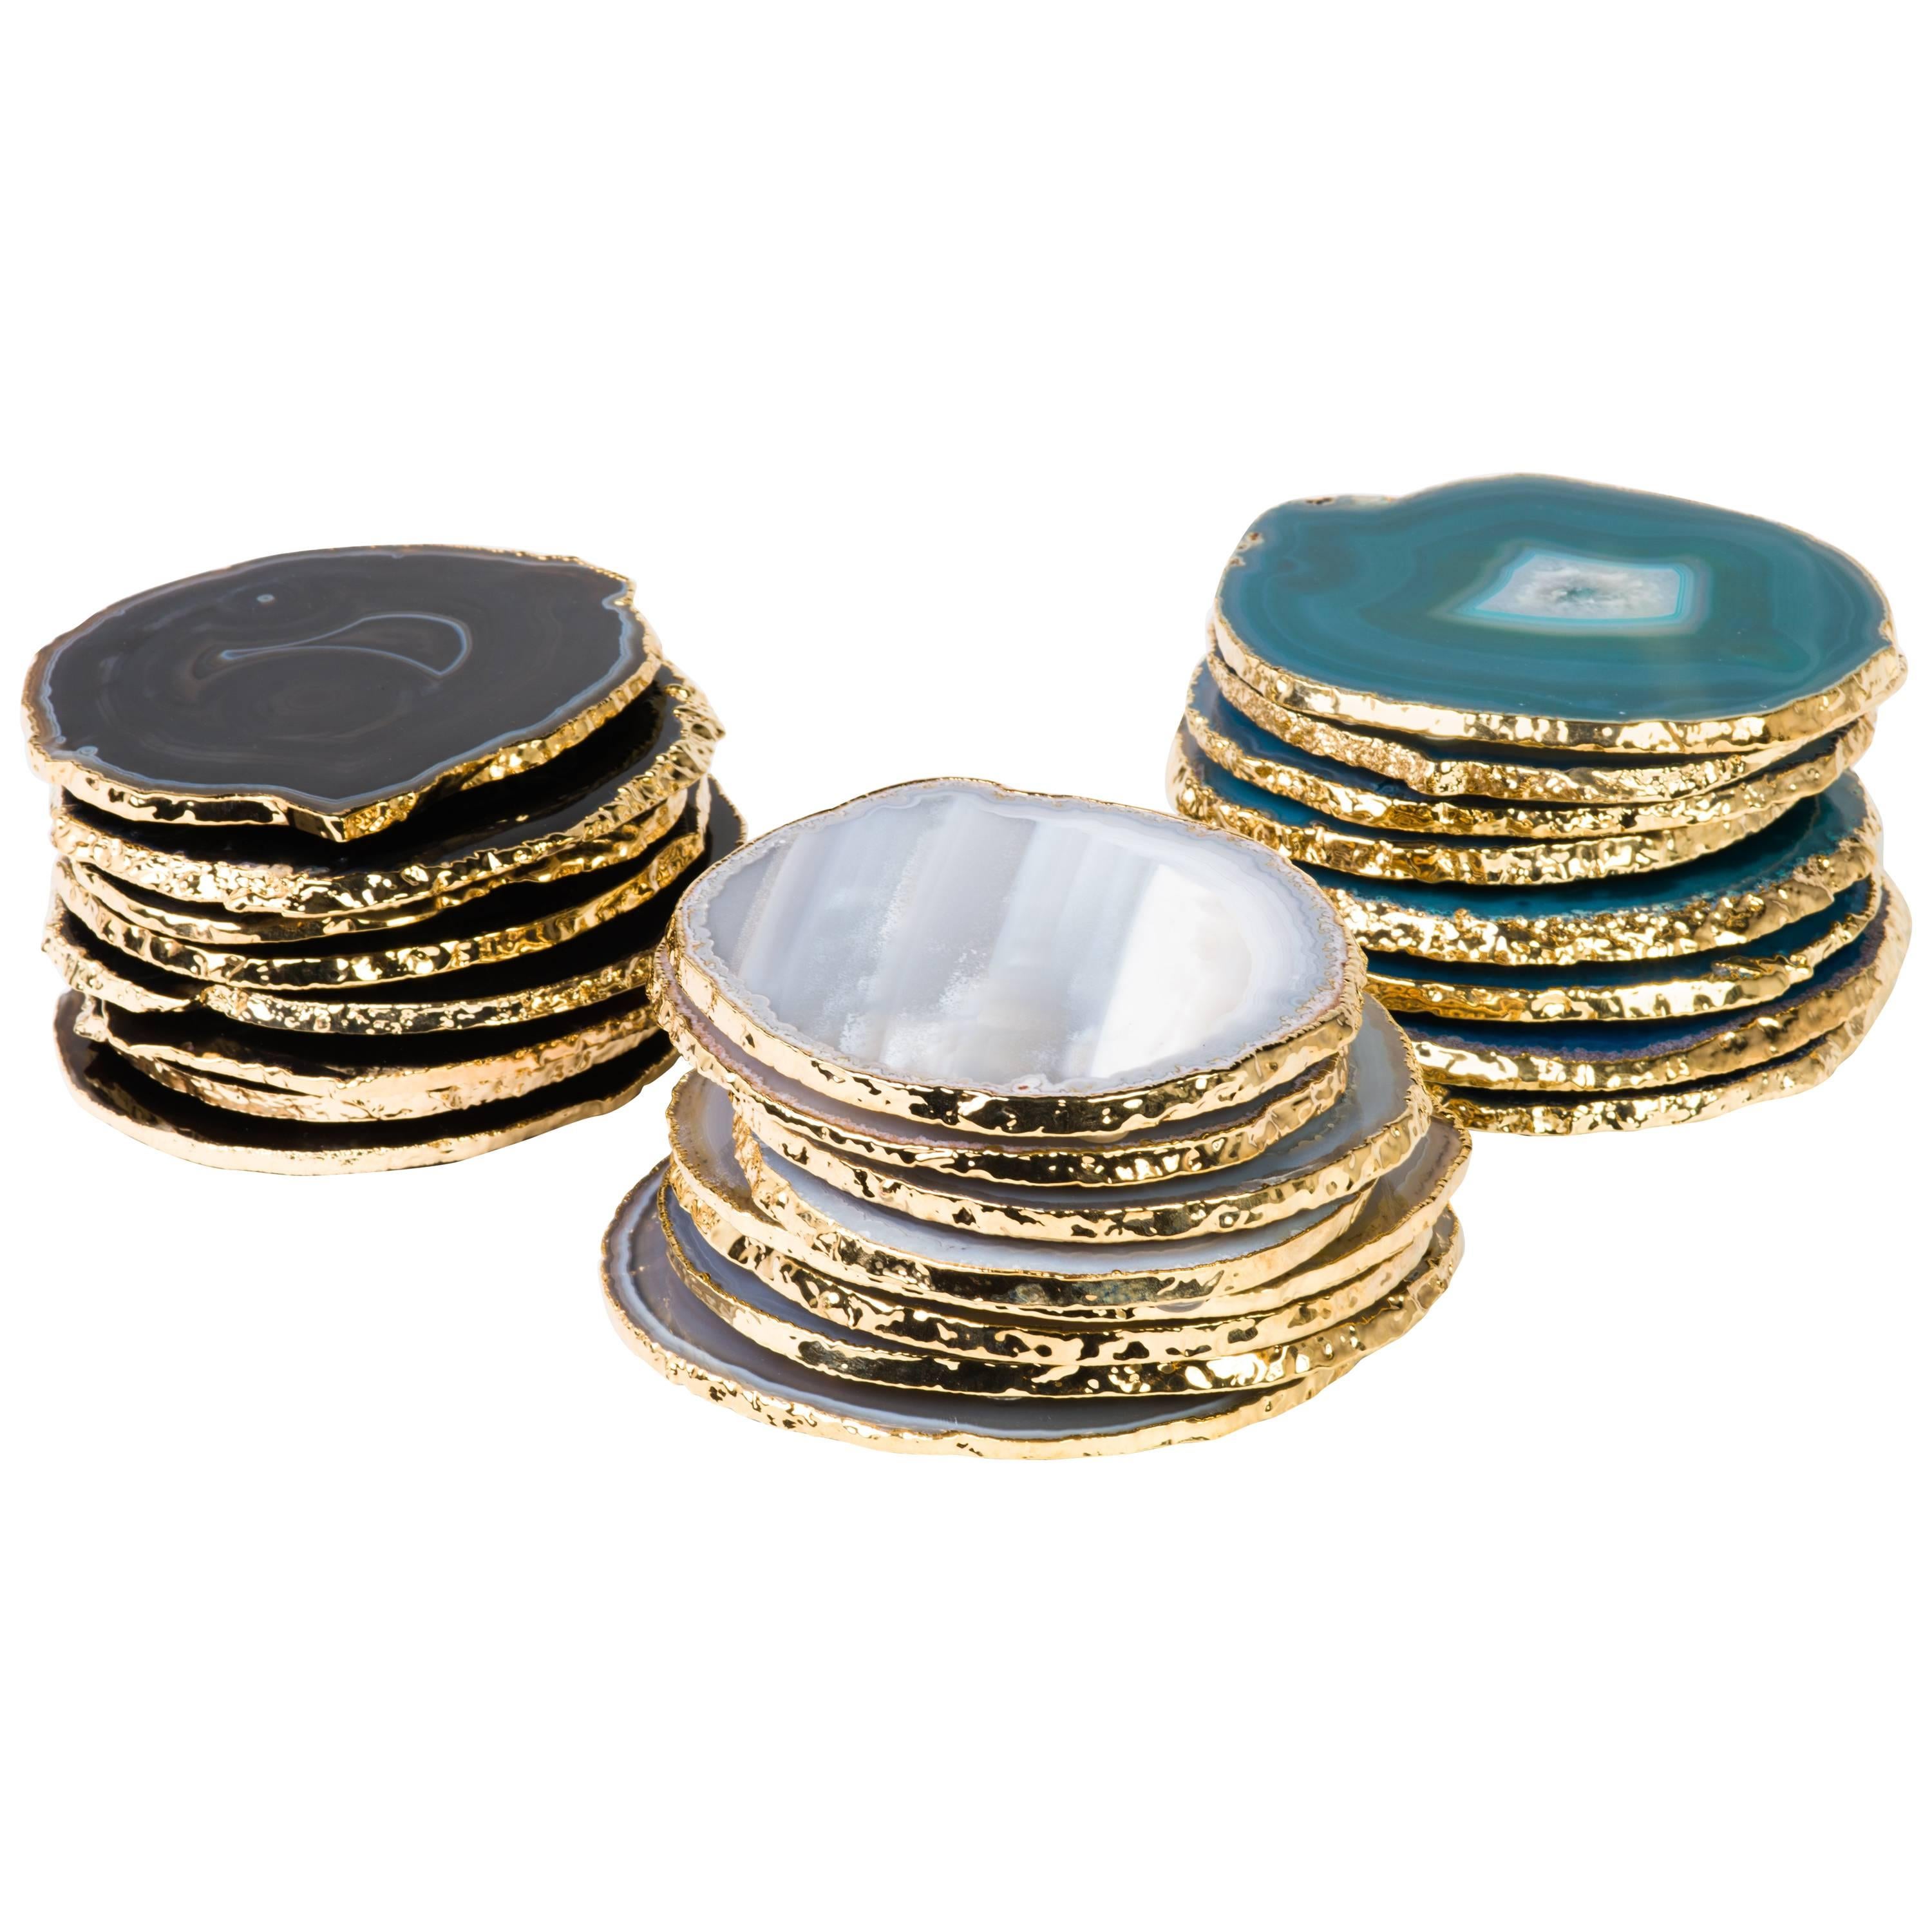 Agate Set of Eight Semi-Precious Gemstone Coasters in Teal Wrapped in 24-Karat Gold